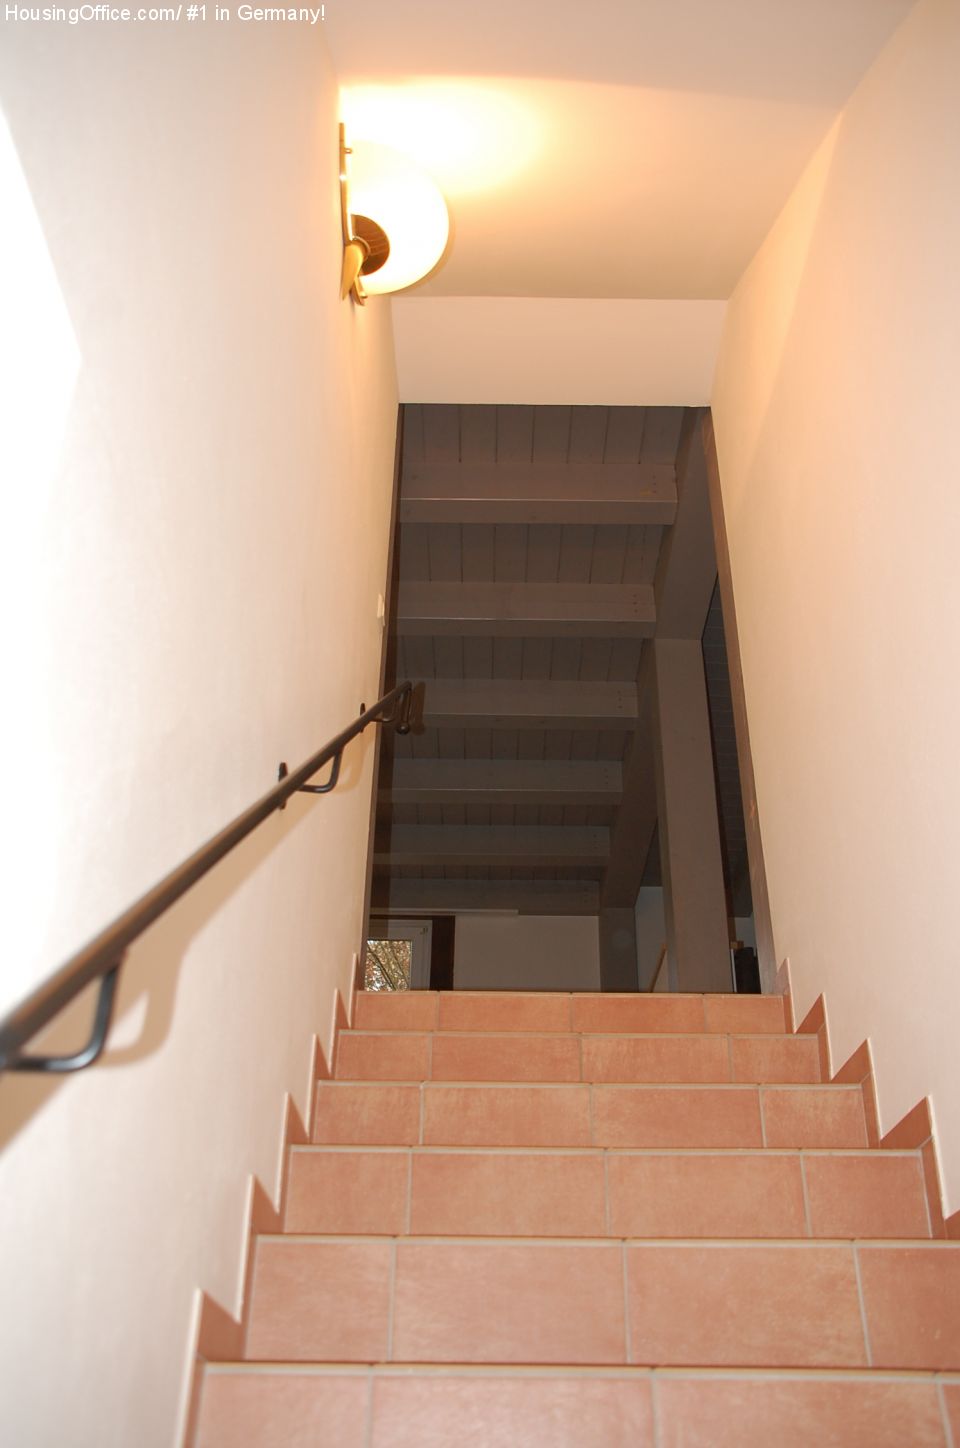 Stairs to the 1st floor